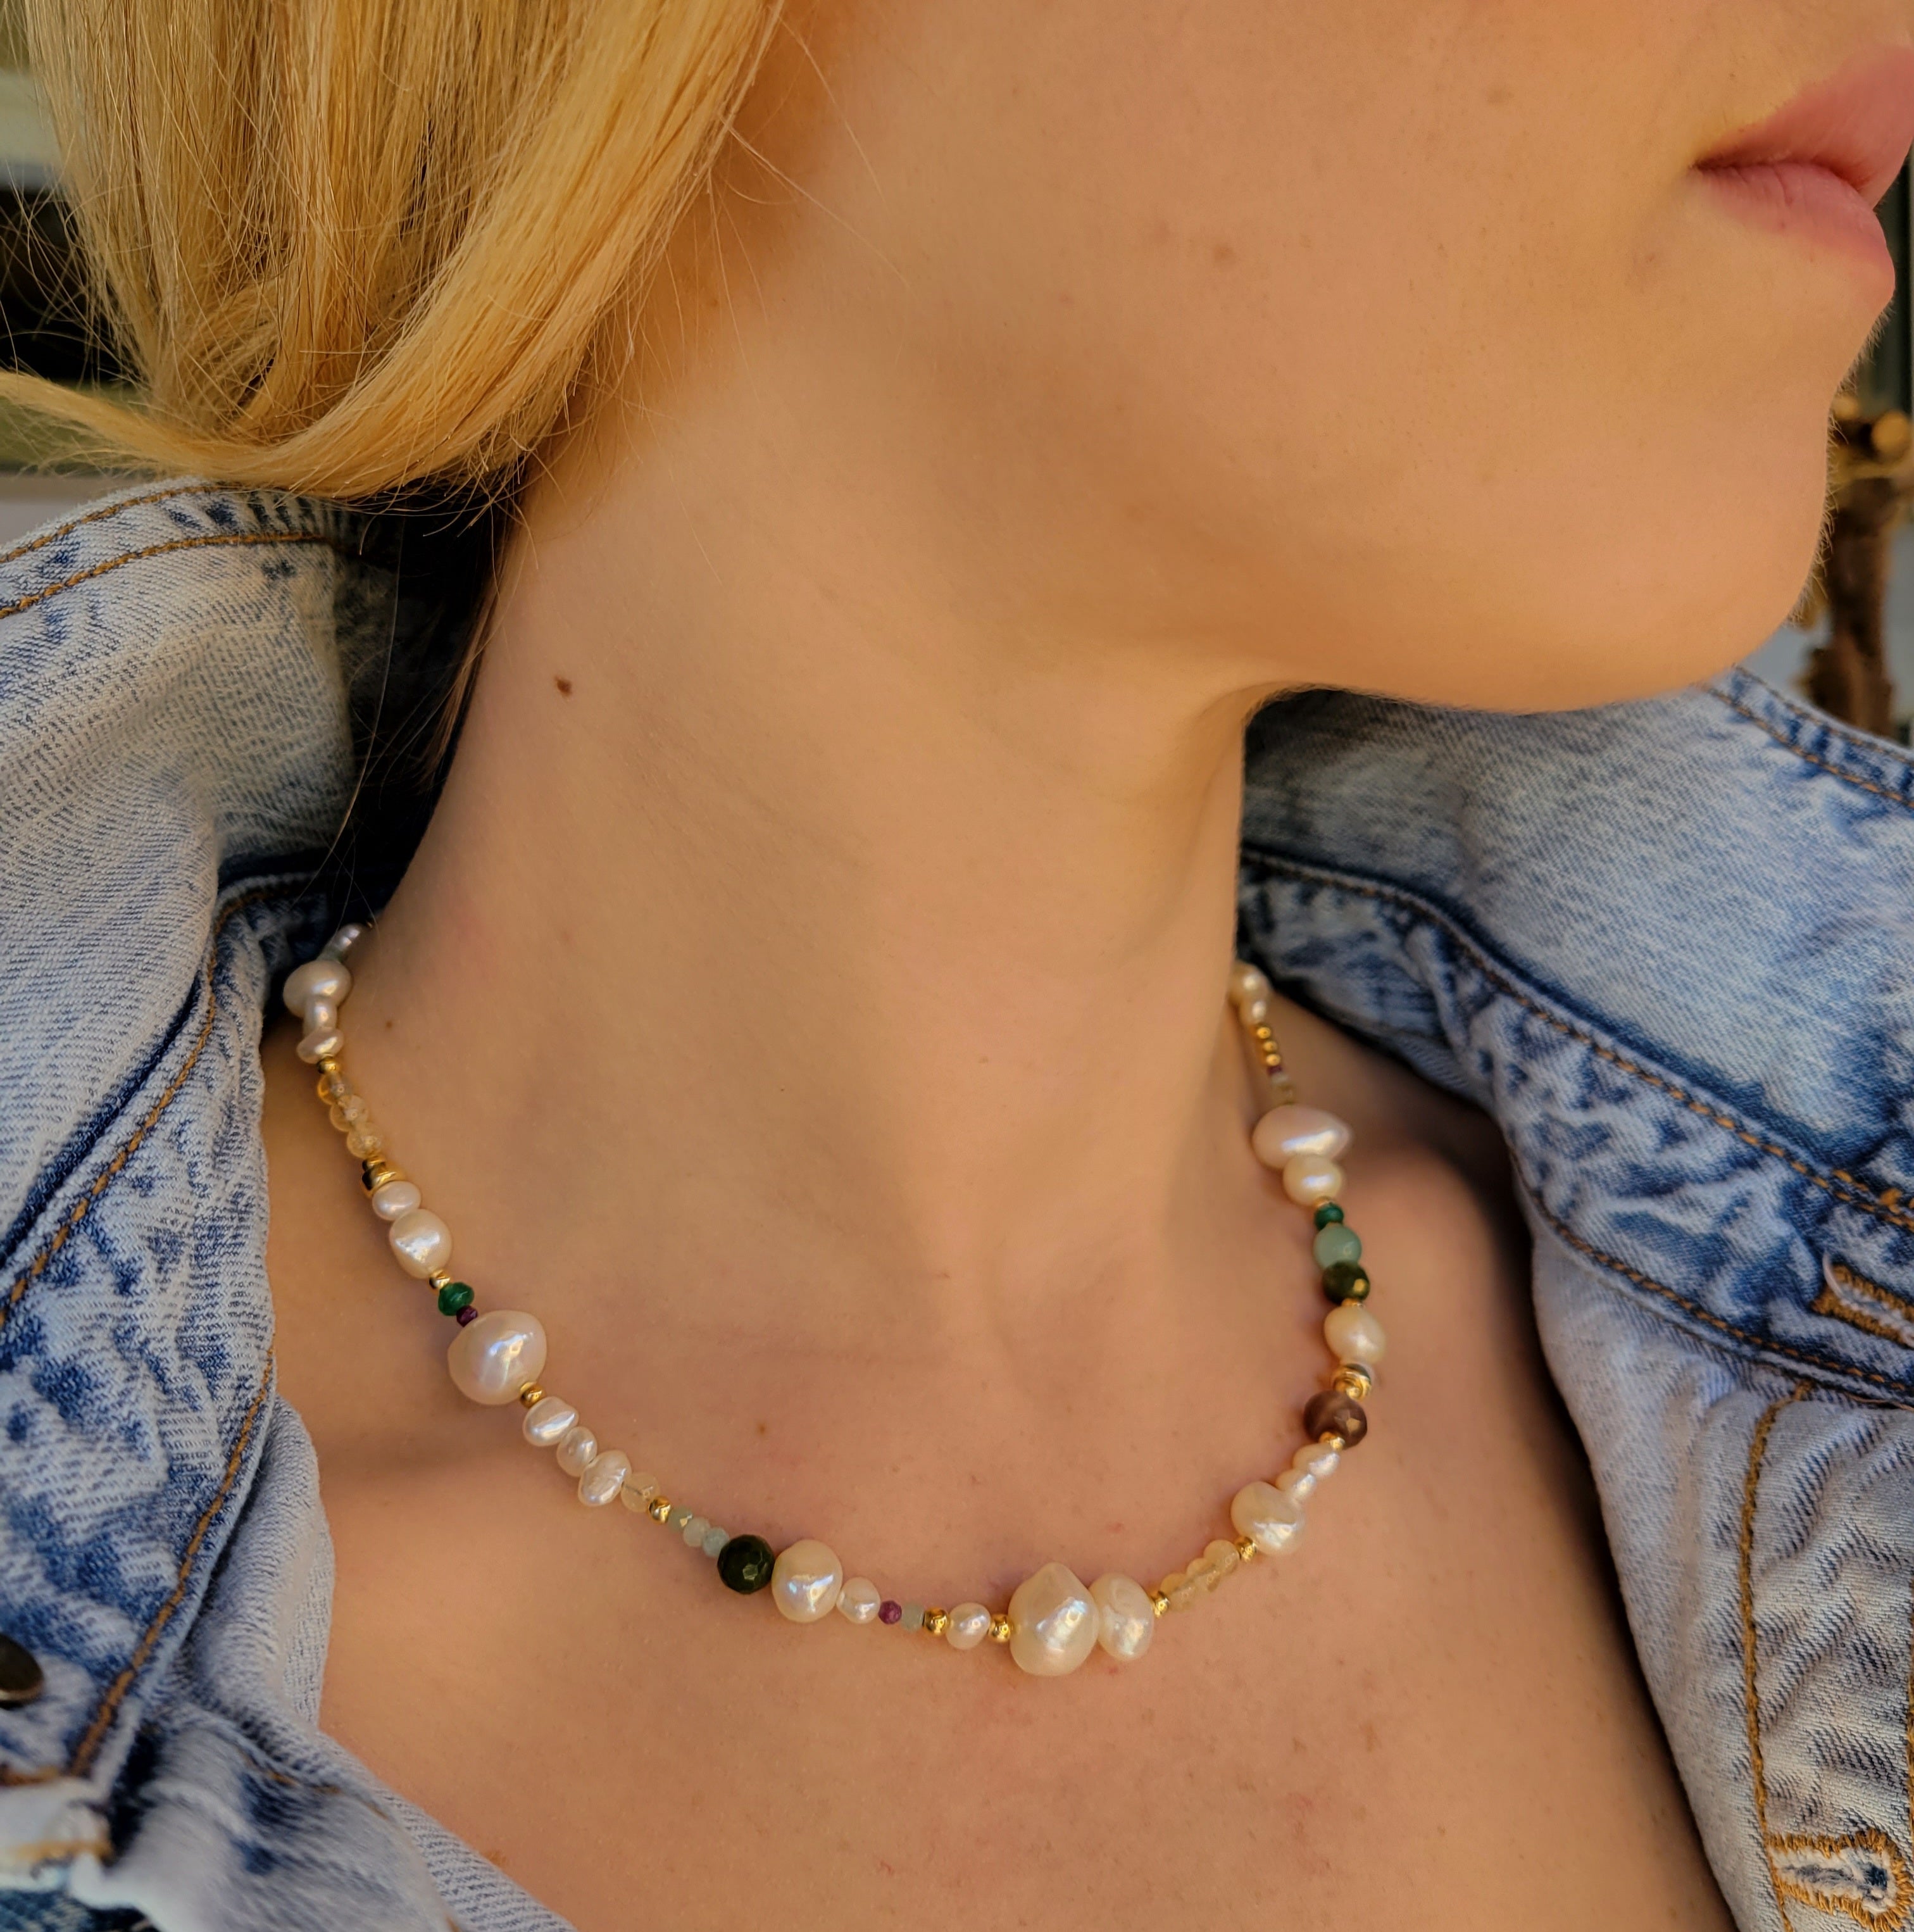 Tula Pearl Necklace, Pearl Choker Necklace, Beach Bridal Jewelry,  Freshwater Pearl Necklace, Gold Pearl Choker, Keshi Pearl Necklace - Etsy |  Jewelry, Pearls, Pearl necklace